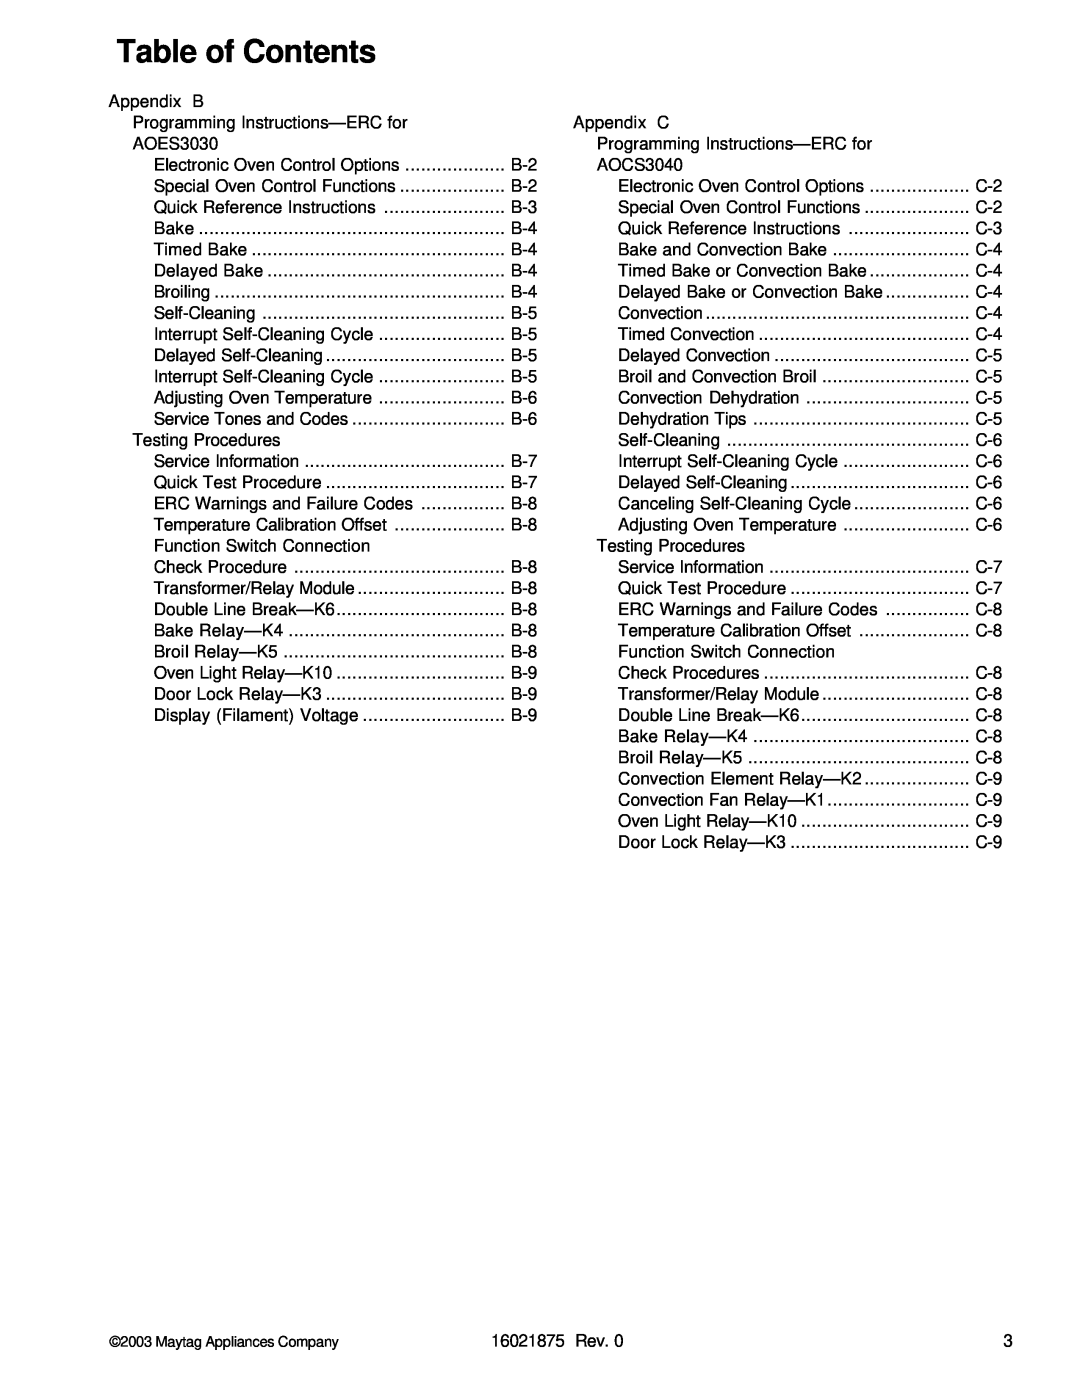 Maytag AOCS3040, AOES3030 manual Table of Contents, Appendix B 